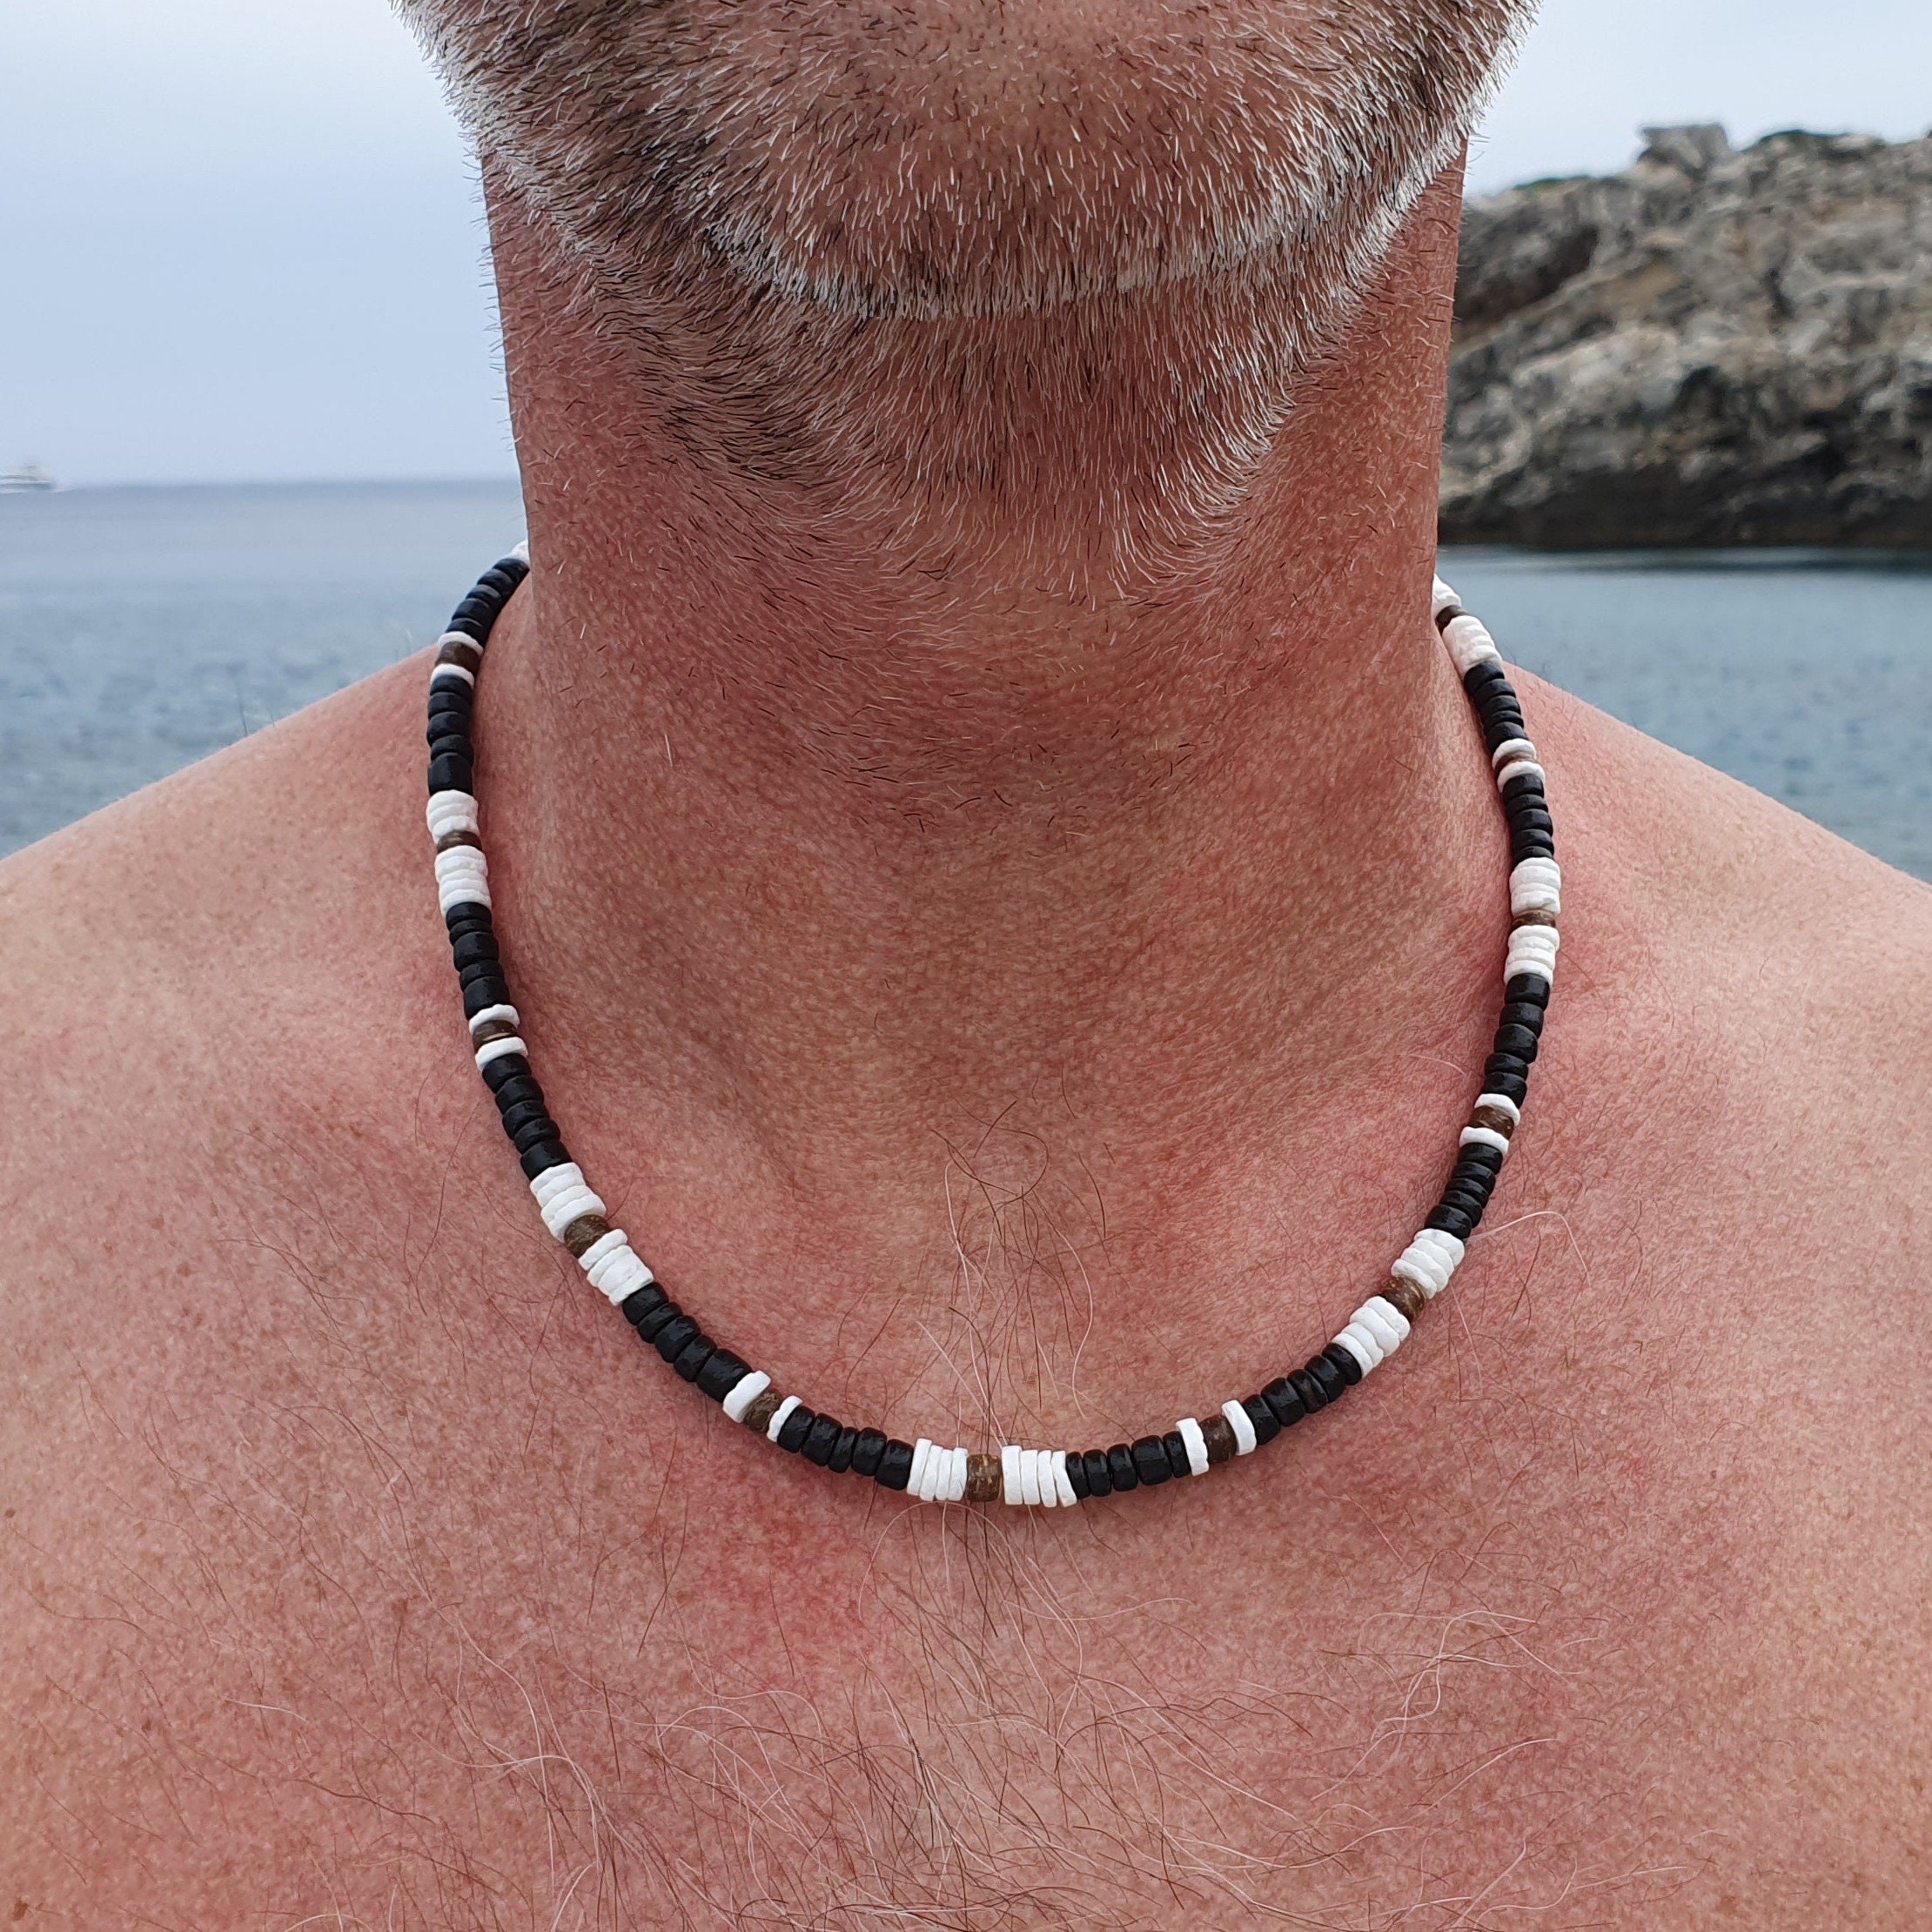 Buy Manly and Masculine Leather Necklace for Men, Surf Necklace, Beach  Necklace, Surfer Necklace, Surfboard Necklace, Men Gift Online in India -  Etsy